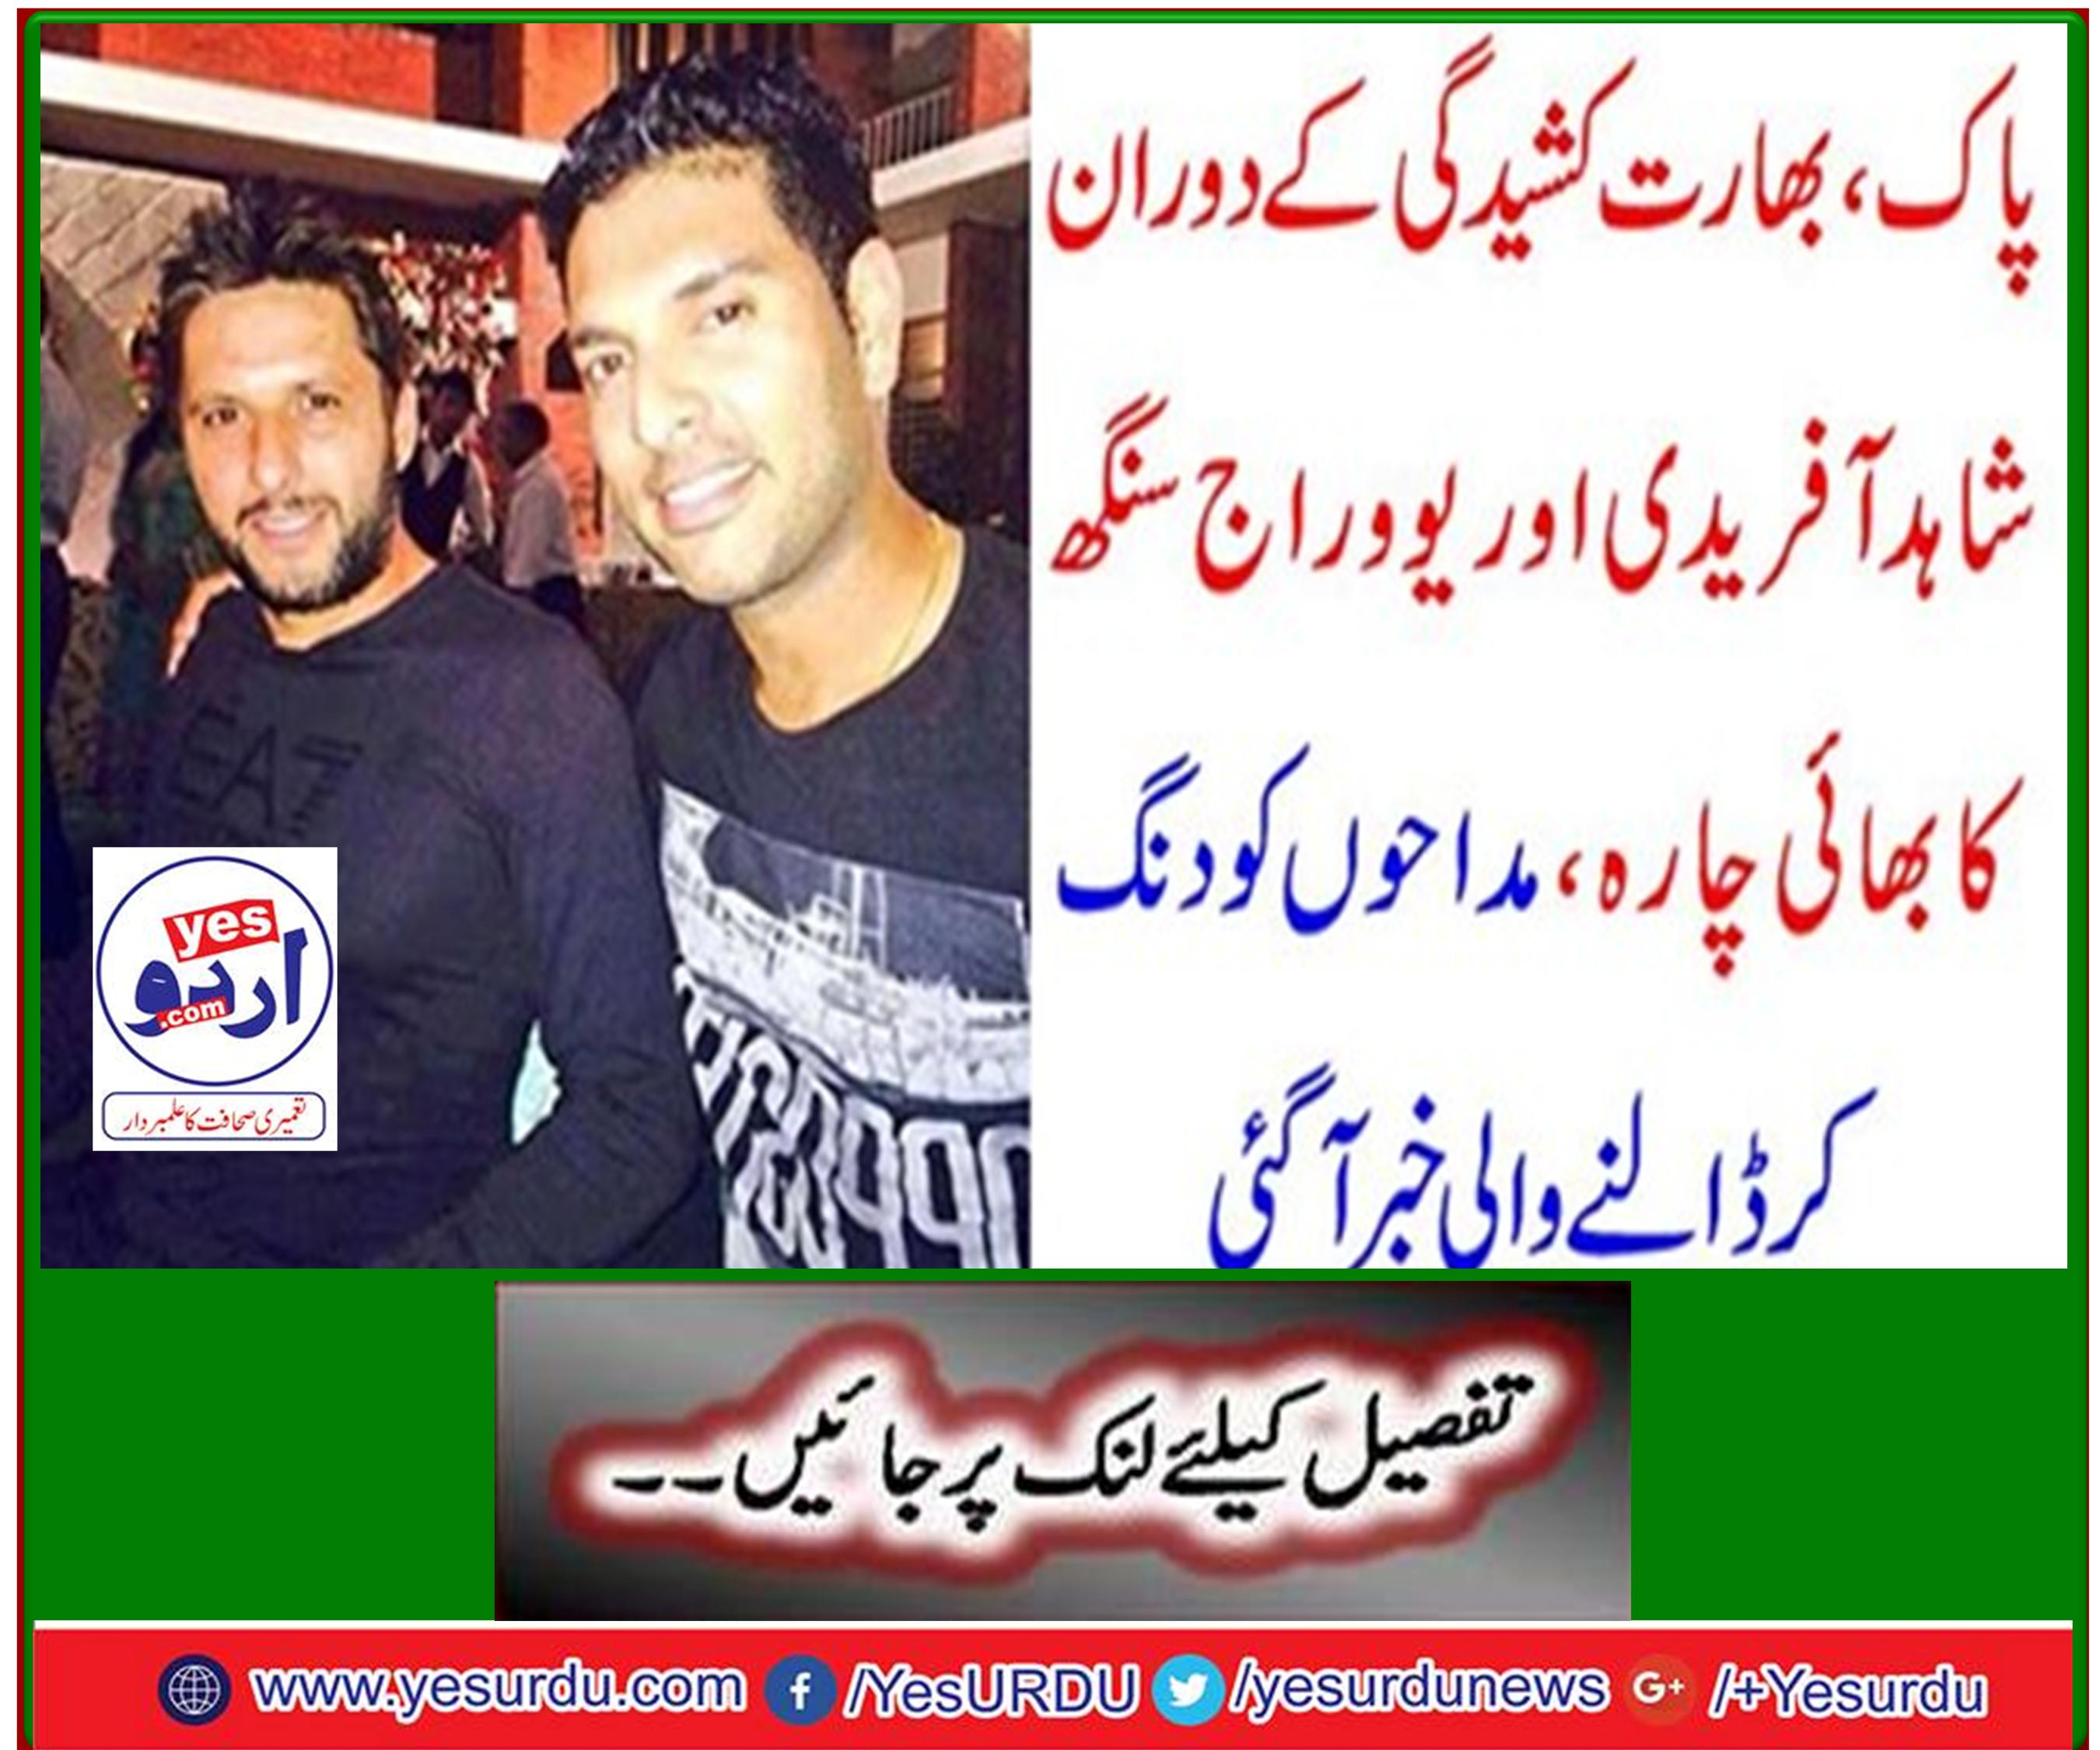 News reports that shocked fans, Shahid Afridi and Yuvraj Singh's brother-in-law during the Pak-India tension.